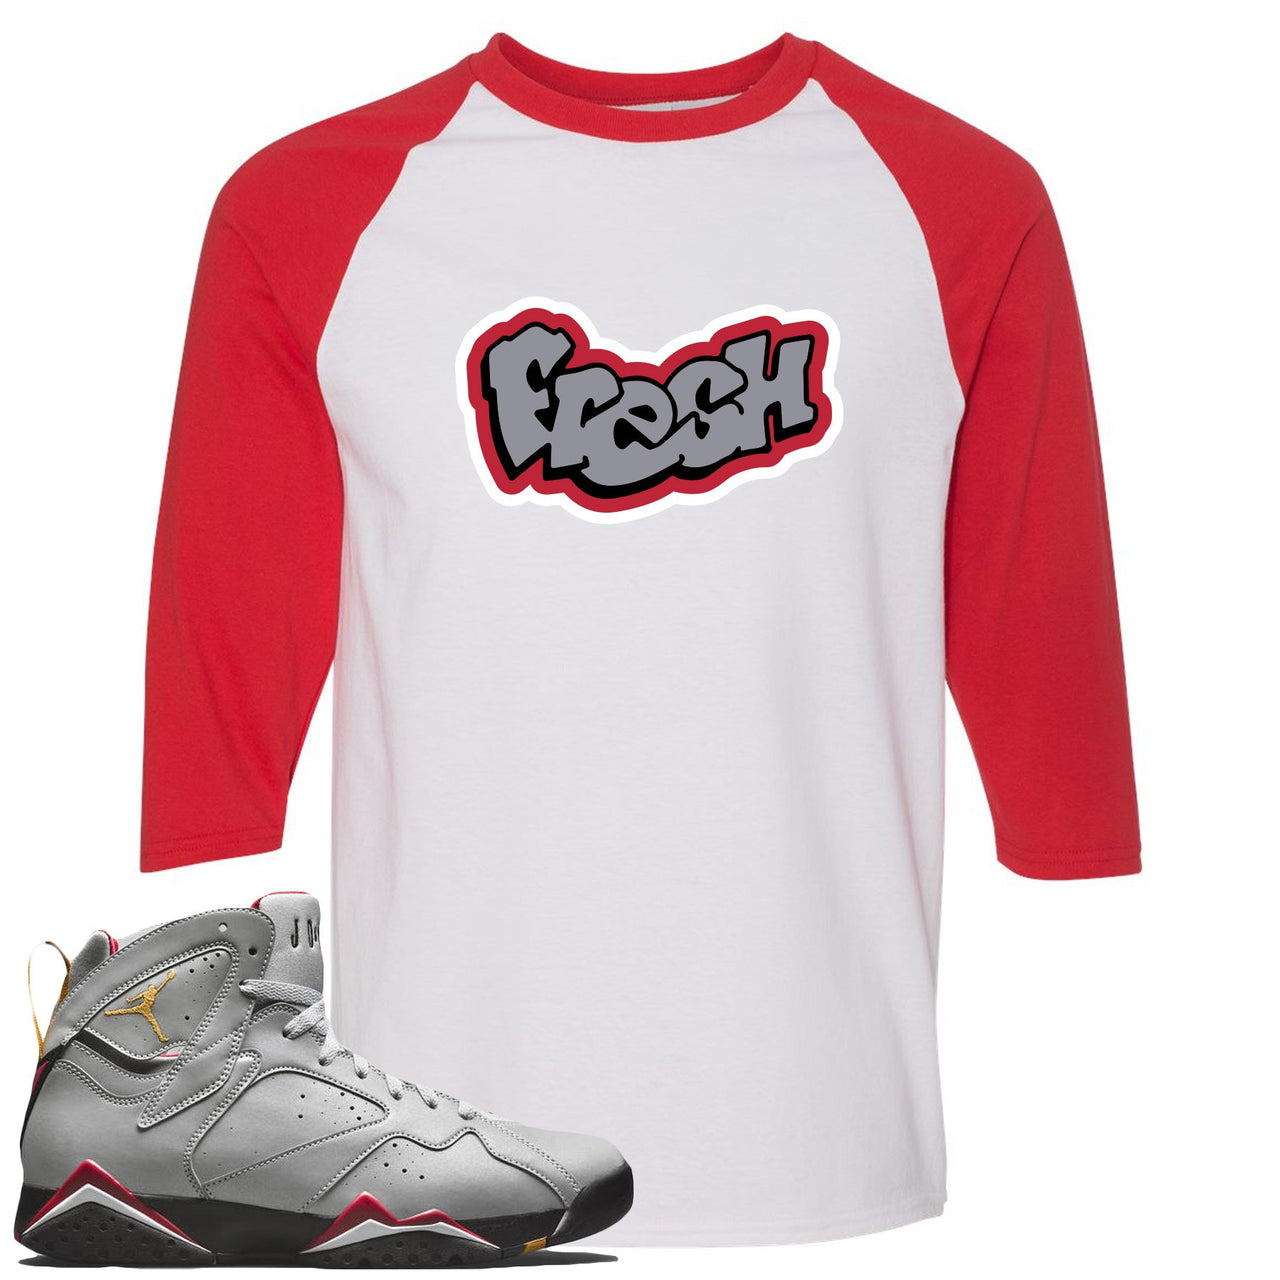 Reflections of a Champion 7s Raglan T Shirt | Fresh Logo, White and Red